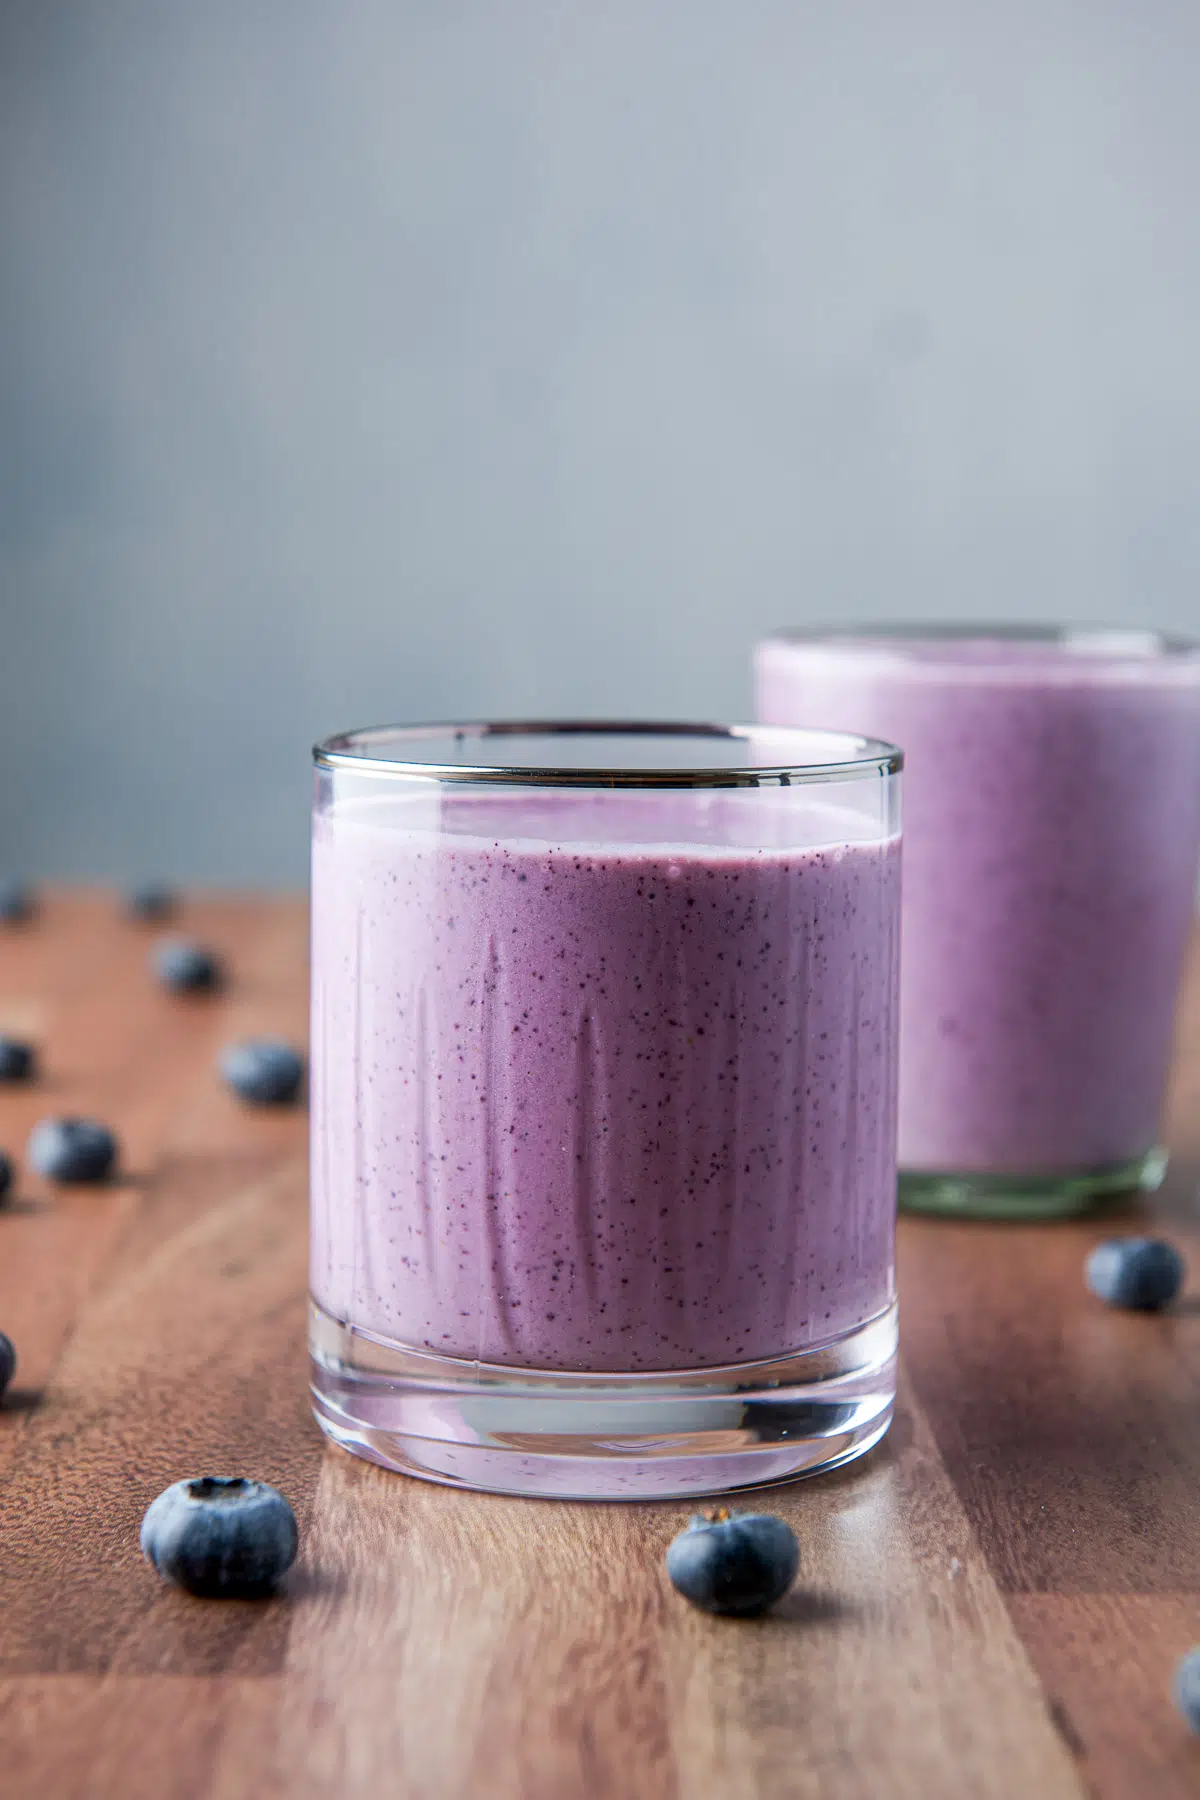 Vertical view of the ridged, silver rimmed glass filled with the blue smoothie with blueberries on the table